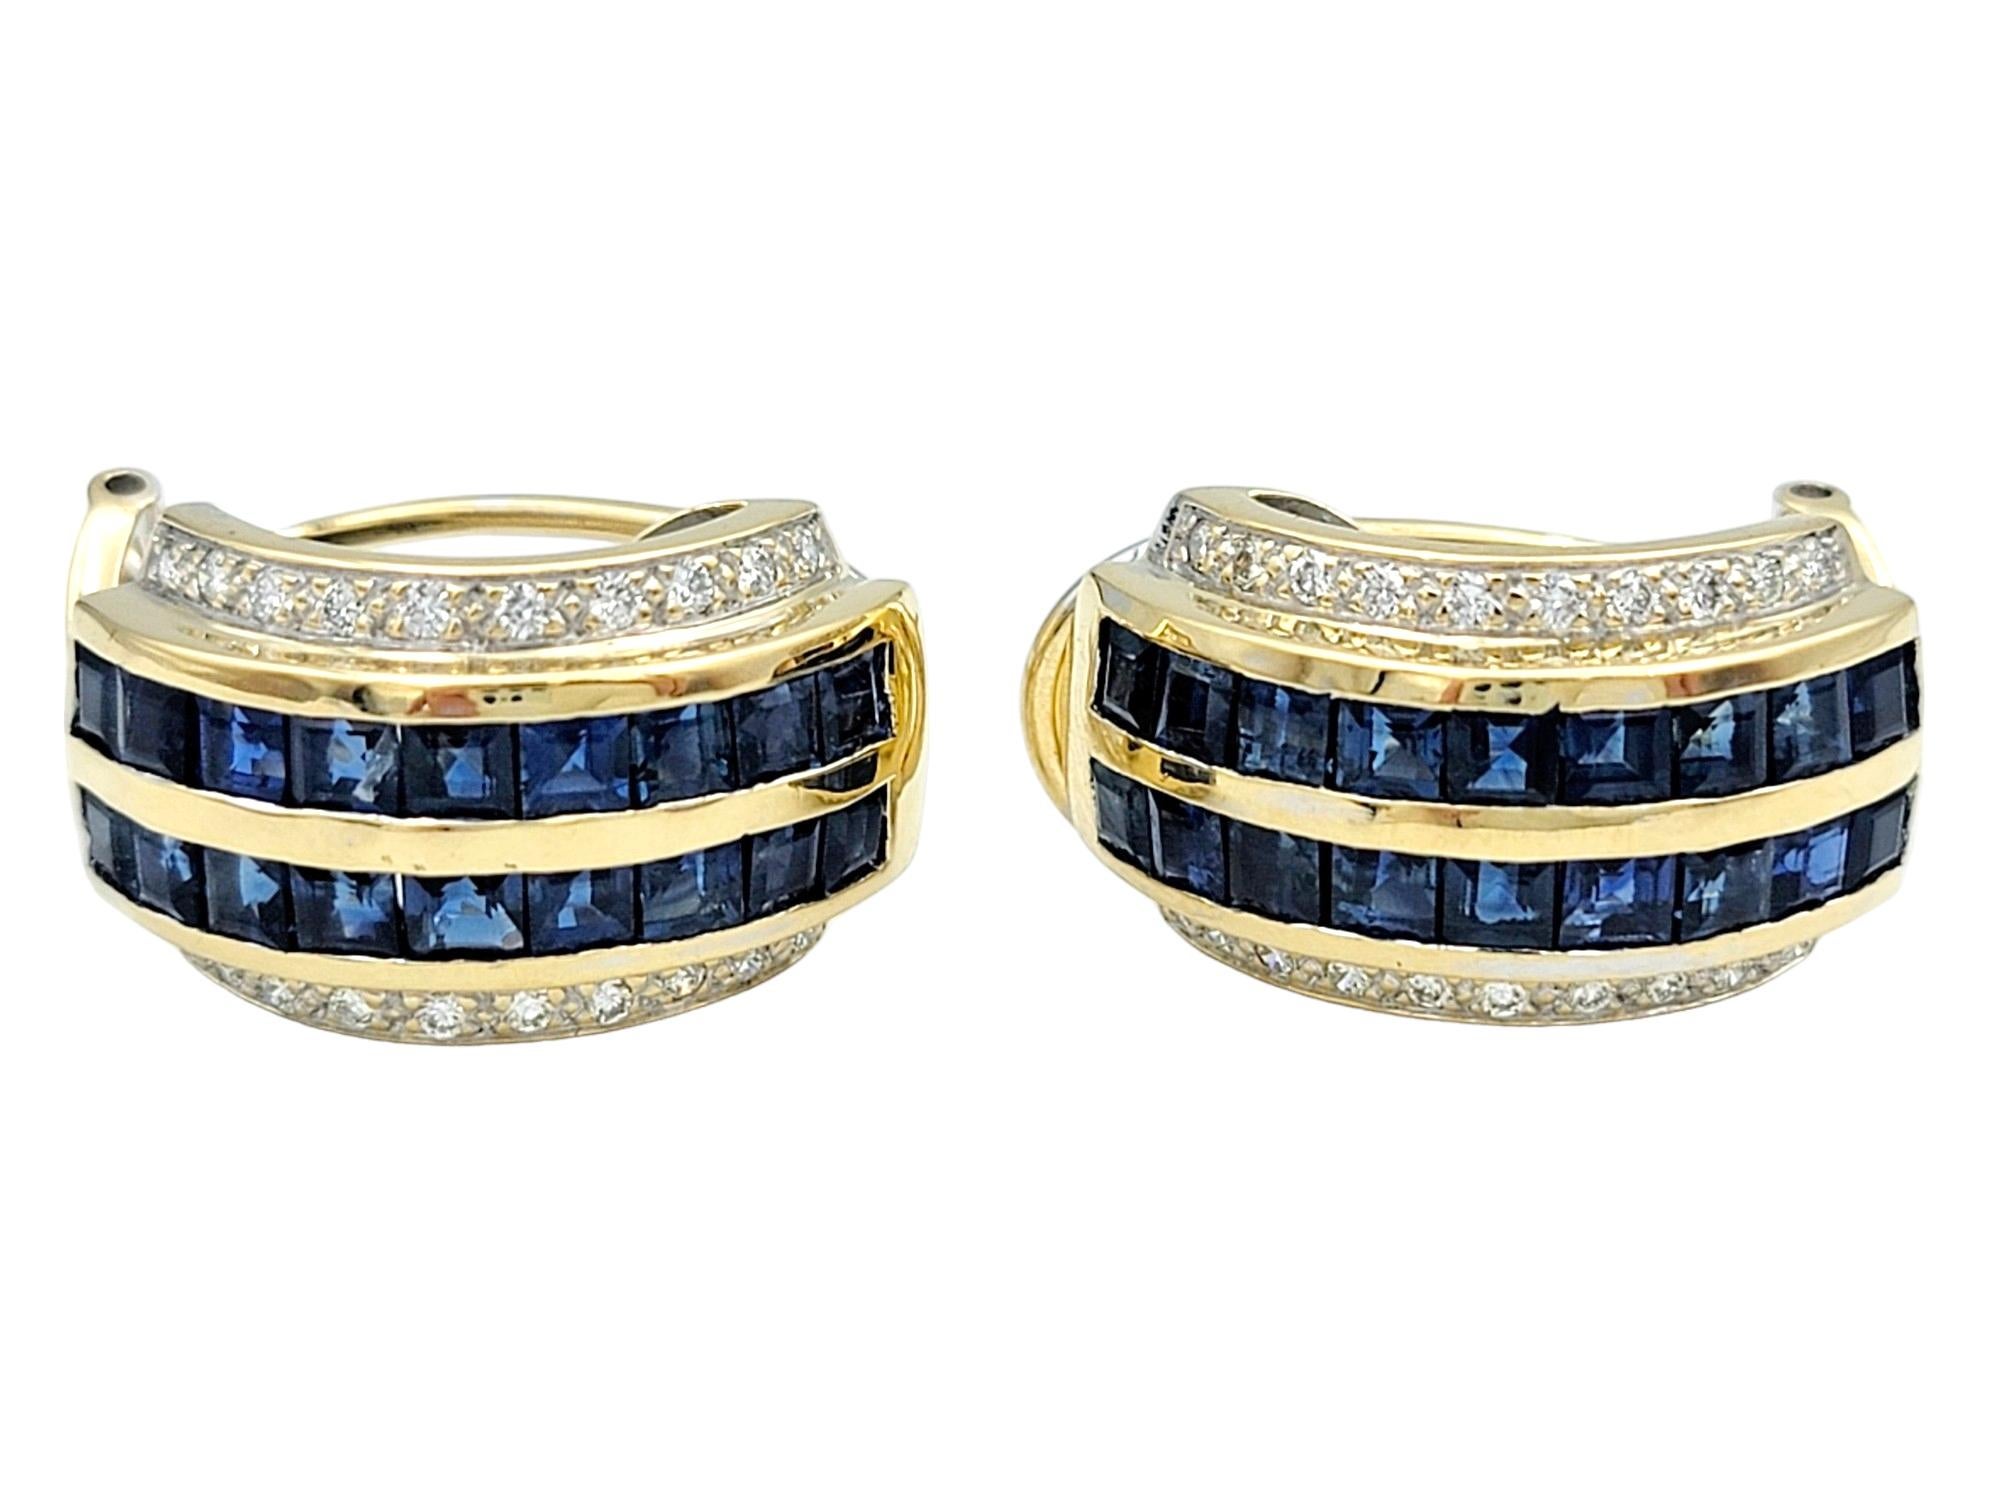 Princess Cut Sapphire and Diamond Half-Hoop Earrings Set in 14 Karat Yellow Gold In Good Condition For Sale In Scottsdale, AZ